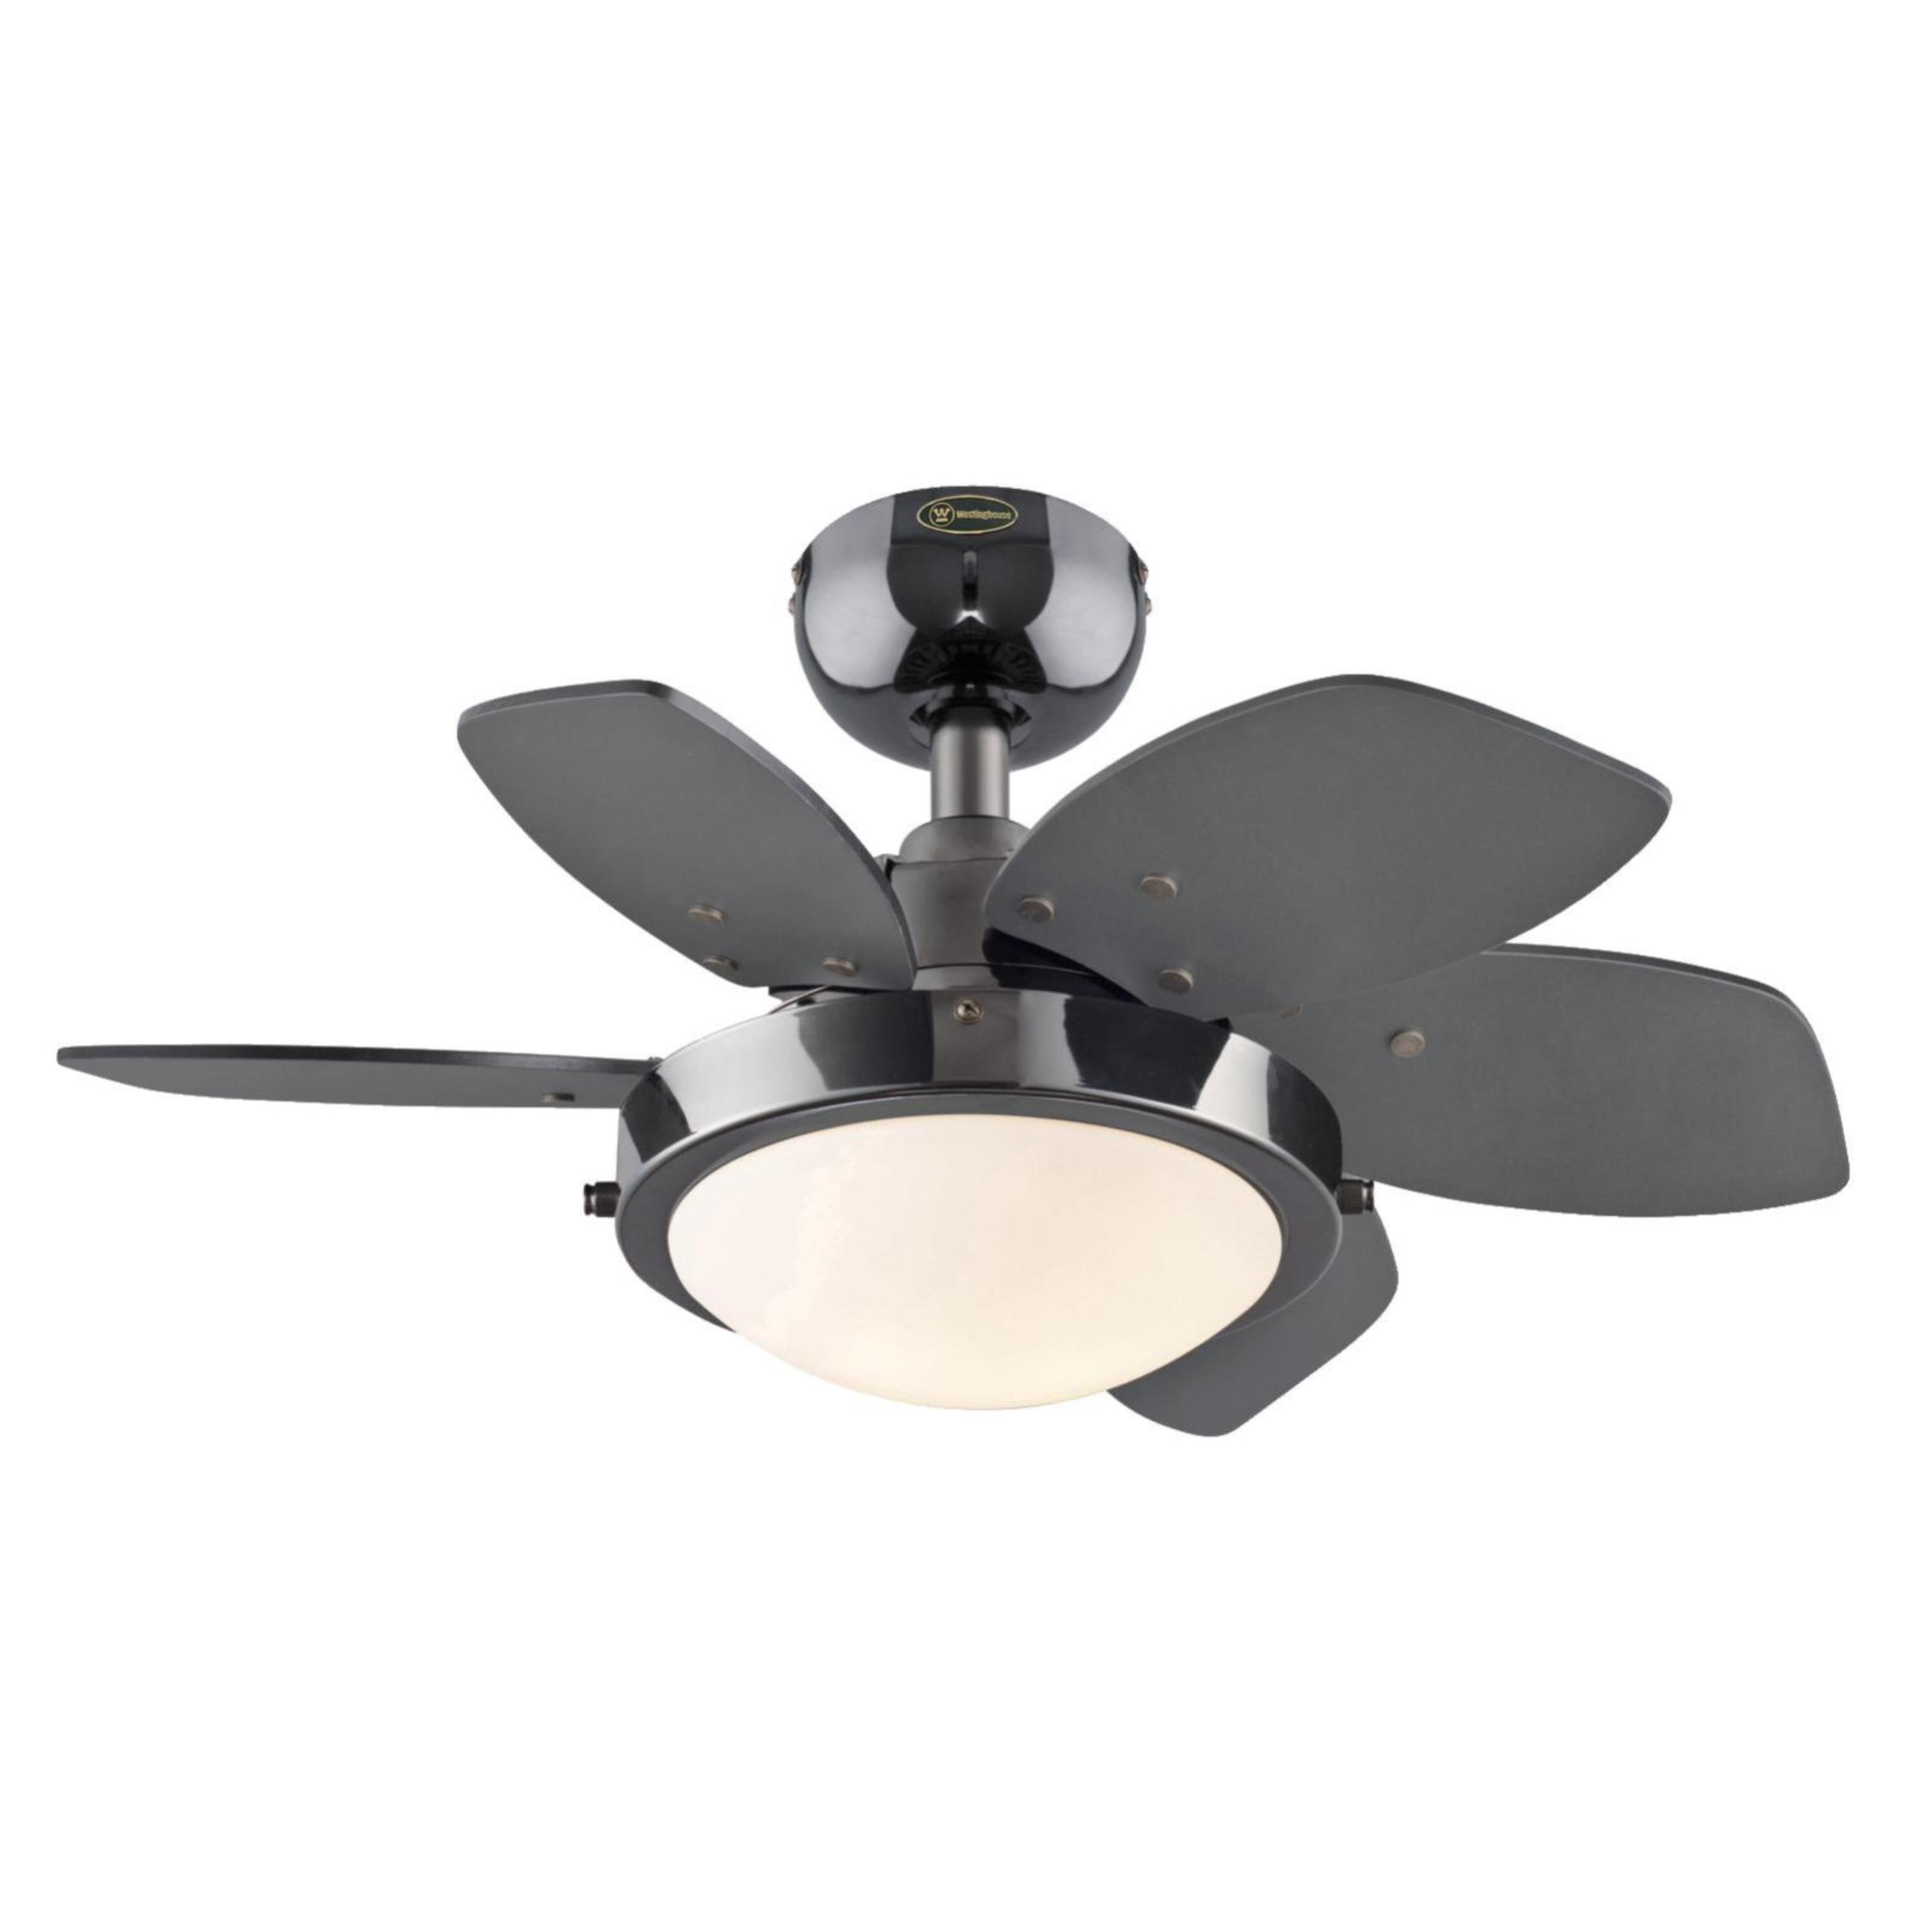 Quince 24-Inch Reversible Six-Blade Indoor Ceiling Fan Westinghouse 7236600 